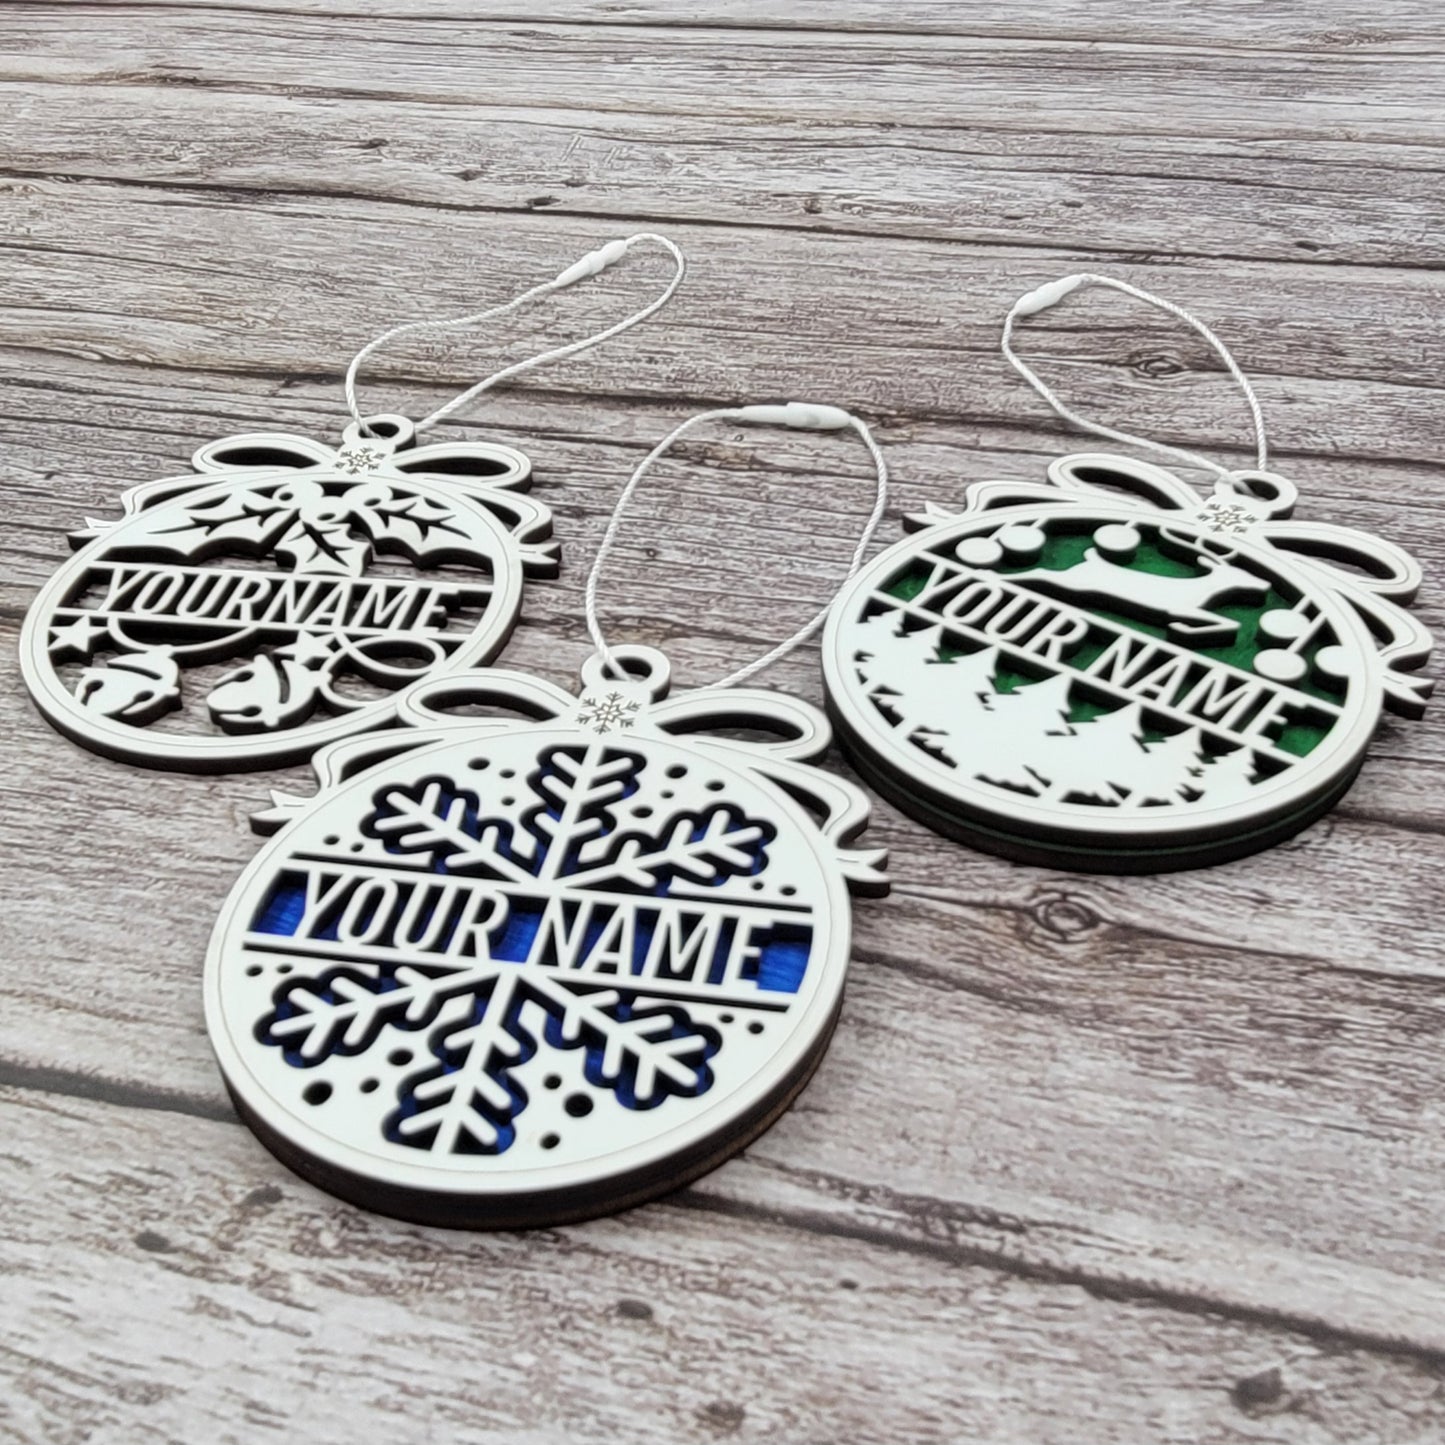 2-Layer Personalized Christmas Ornaments